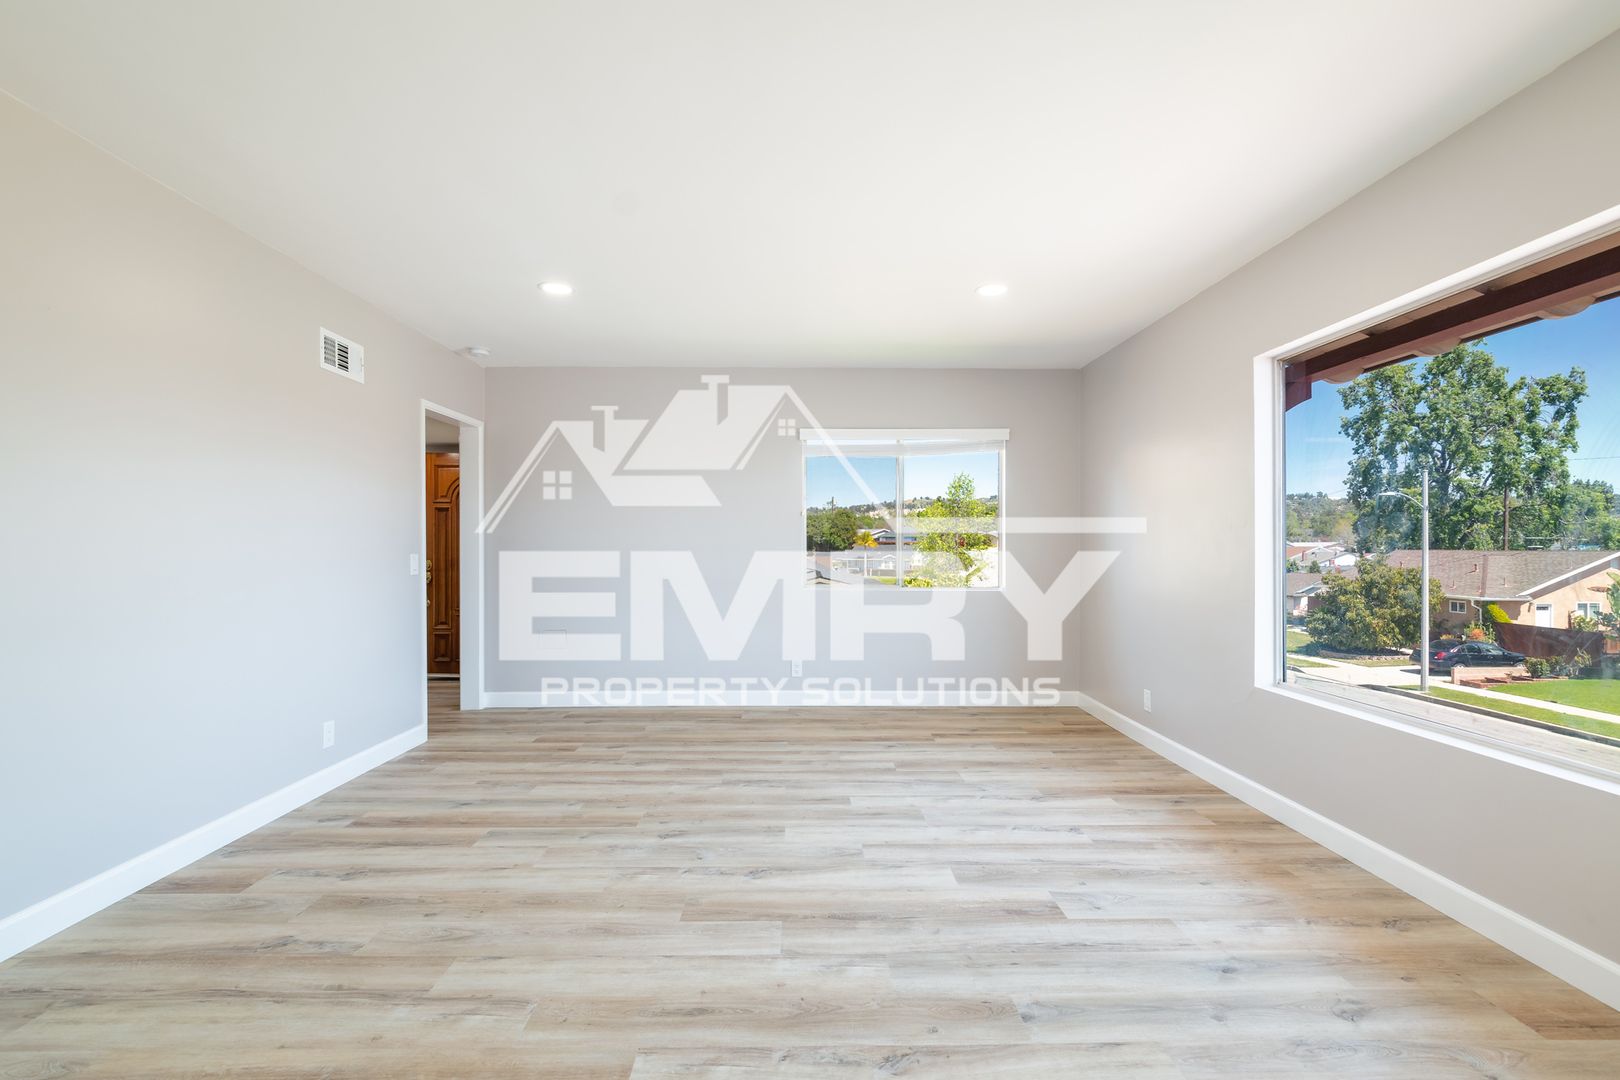 Recently Remodeled 4 Bed 2 Bath Single Home in La Habra